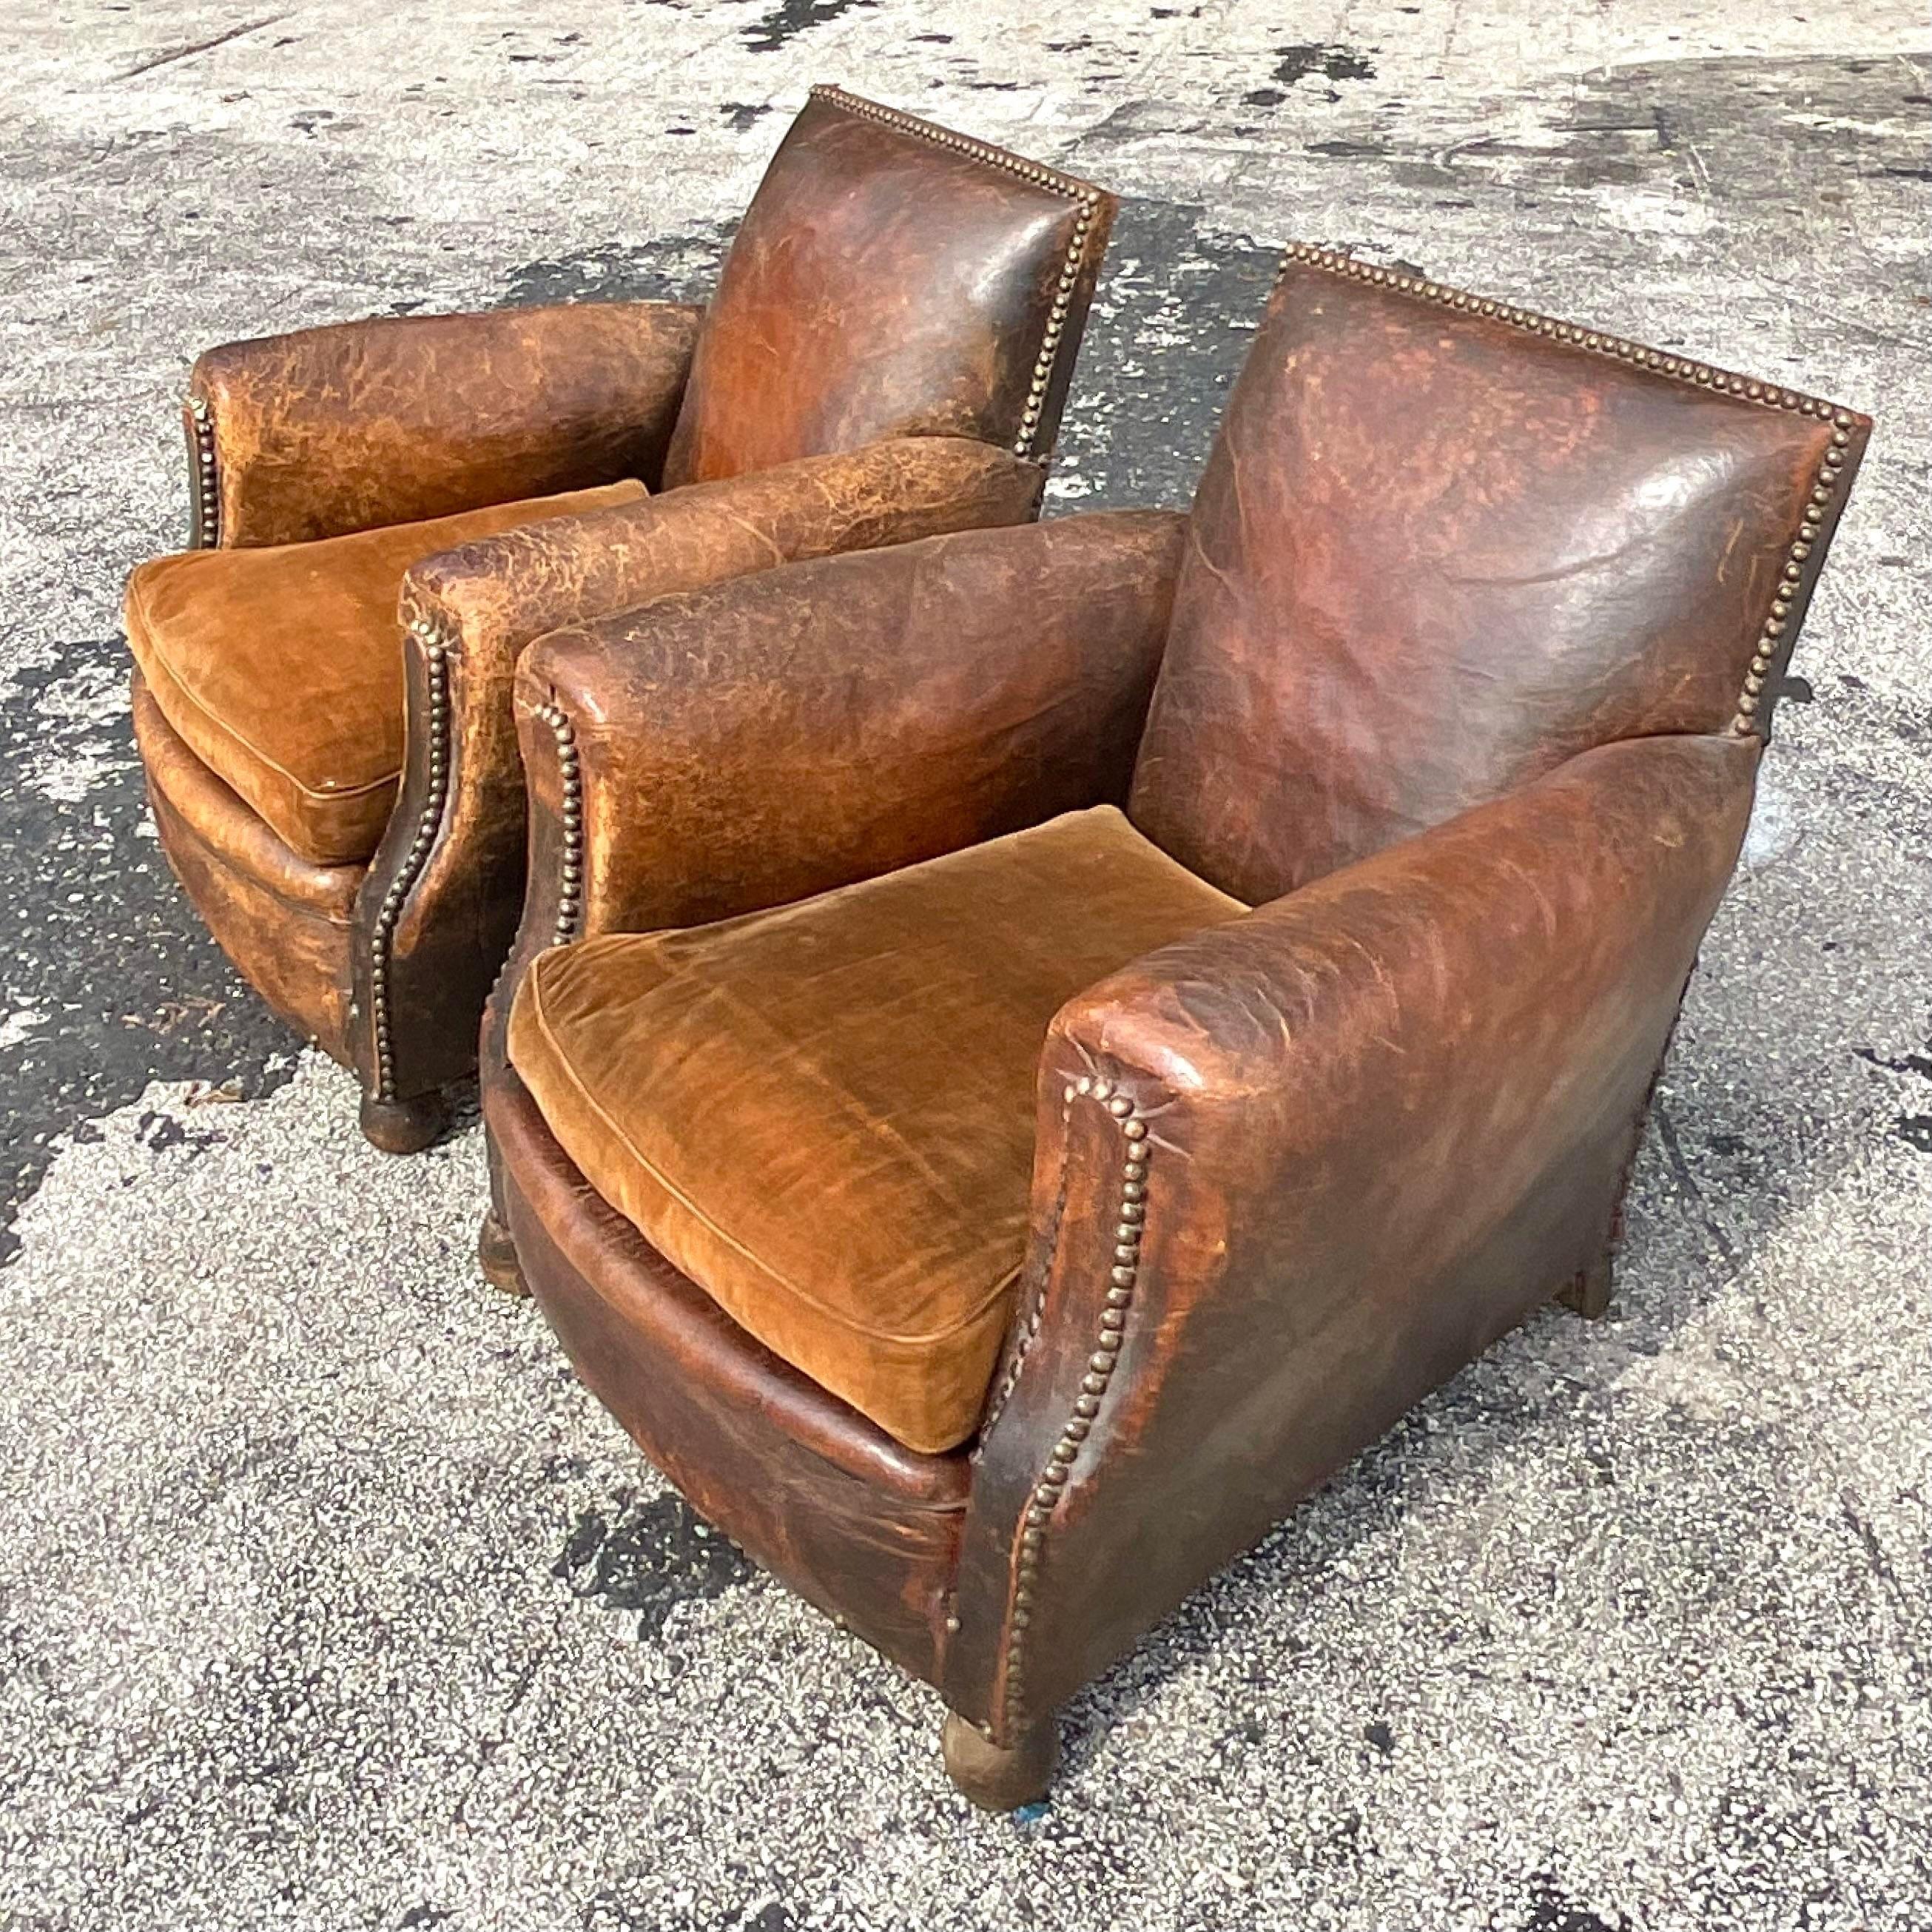 Vintage Boho Distressed French Art Deco Leather Club Chairs - a Pair For Sale 8